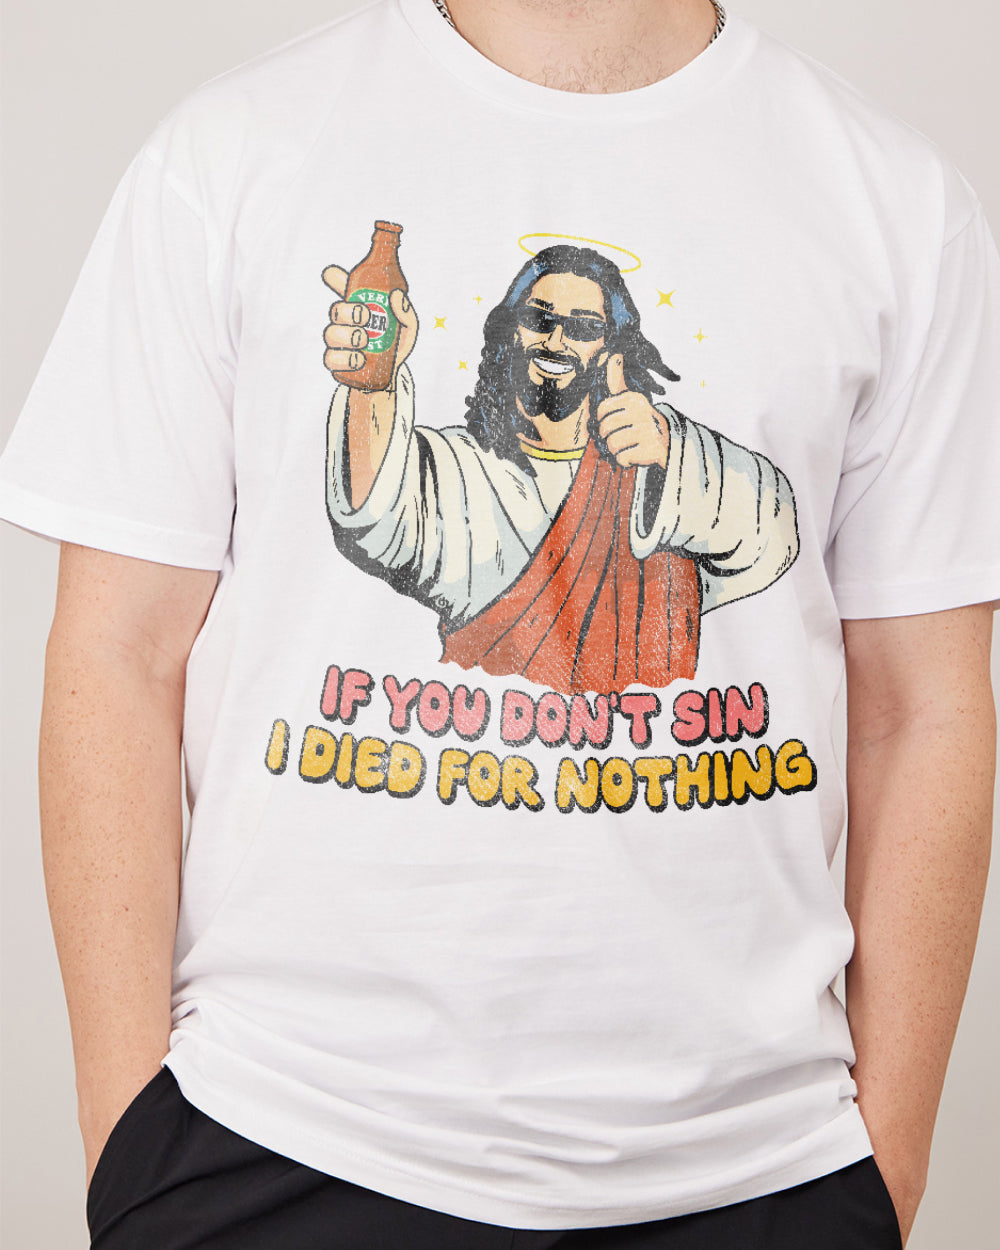 If You Don't Sin I Died for Nothing T-Shirt